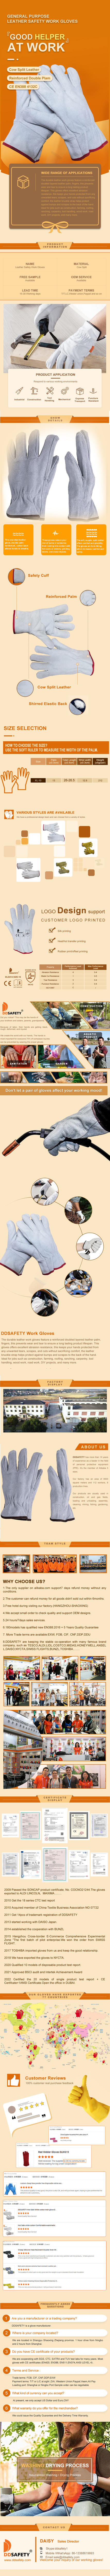  Leather Drivers Work Gloves - DLD414 Leather Drivers Work Gloves - DLD414 gloves,leather gloves,work gloves,driving gloves,Leather Drivers Gloves